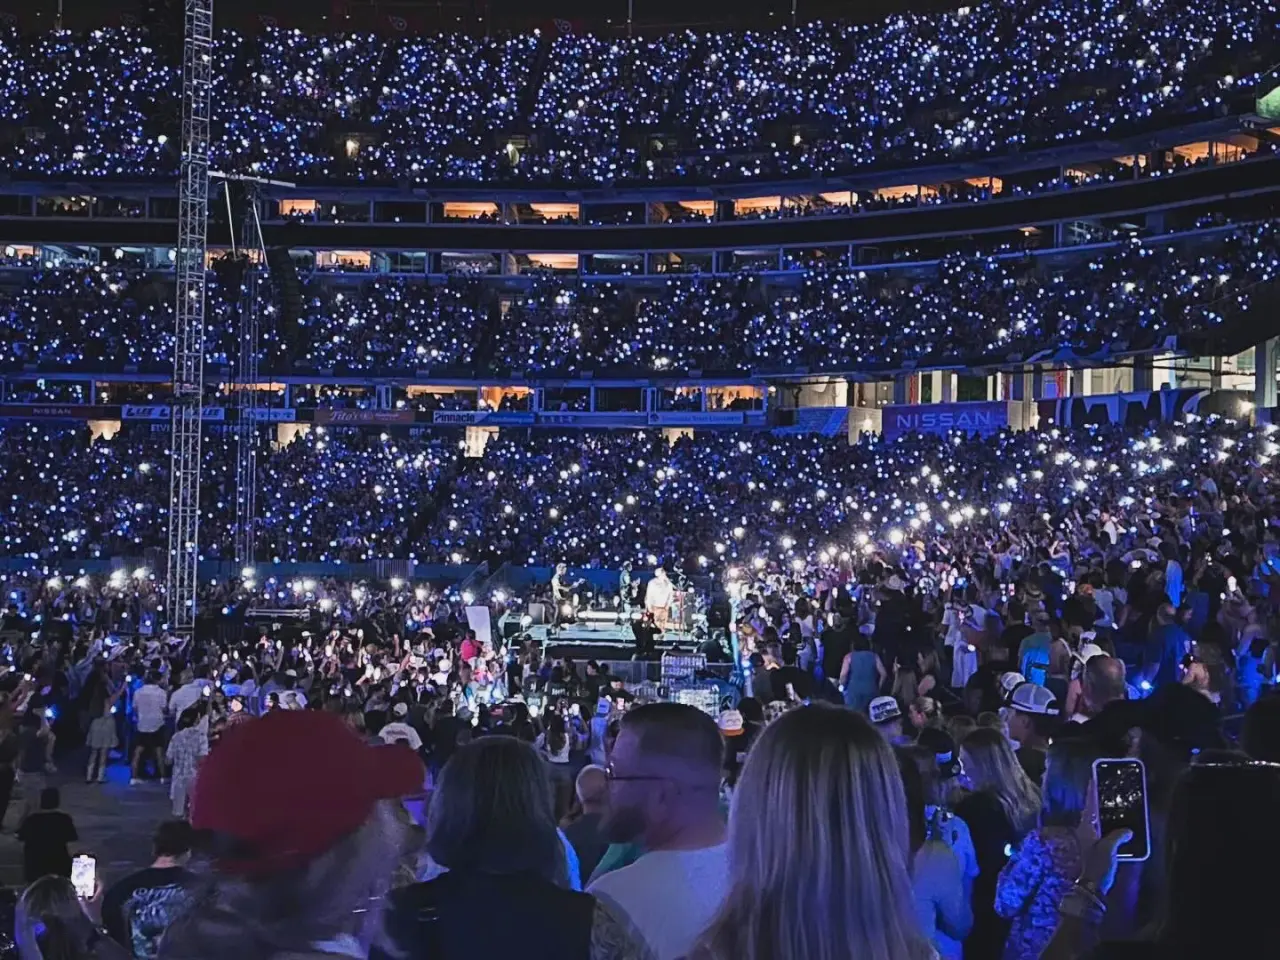 Photo of the crowd with lights at Nissan Stadium